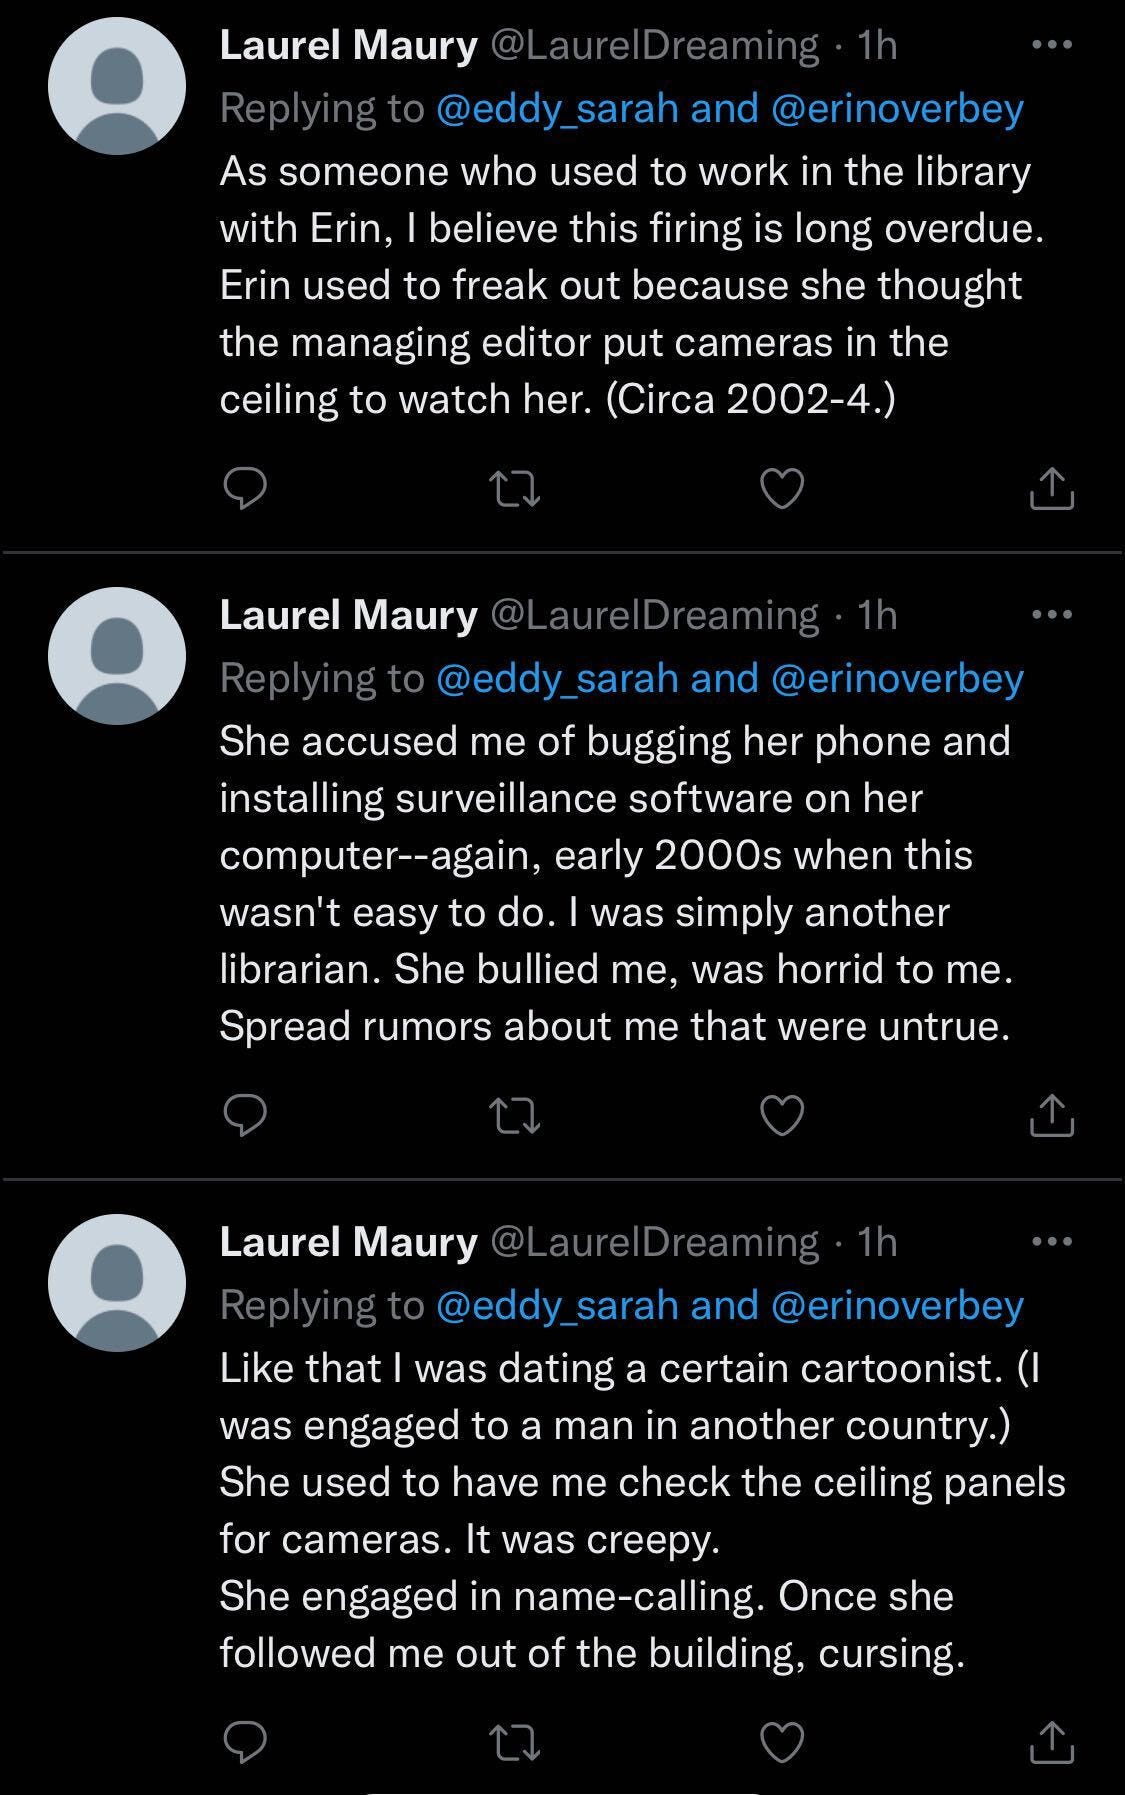 Three tweets by Laurel Maury (@LaurelDreaming), which read: “As someone who used to work in the library with Erin, I believe this firing is long overdue. Erin used to freak out because she thought the managing editor put cameras in the ceiling to watch her. (Circa 2002-4.),” “She accused me of bugging her phone and installing surveillance software on her computer--again, early 2000s when this wasn't easy to do. I was simply another librarian. She bullied me, was horrid to me. Spread rumors about me that were untrue,” and “Like that I was dating a certain cartoonist. (I was engaged to a man in another country.) She used to have me check the ceiling panels for cameras. It was creepy. She engaged in name-calling. Once she followed me out of the building, cursing.”